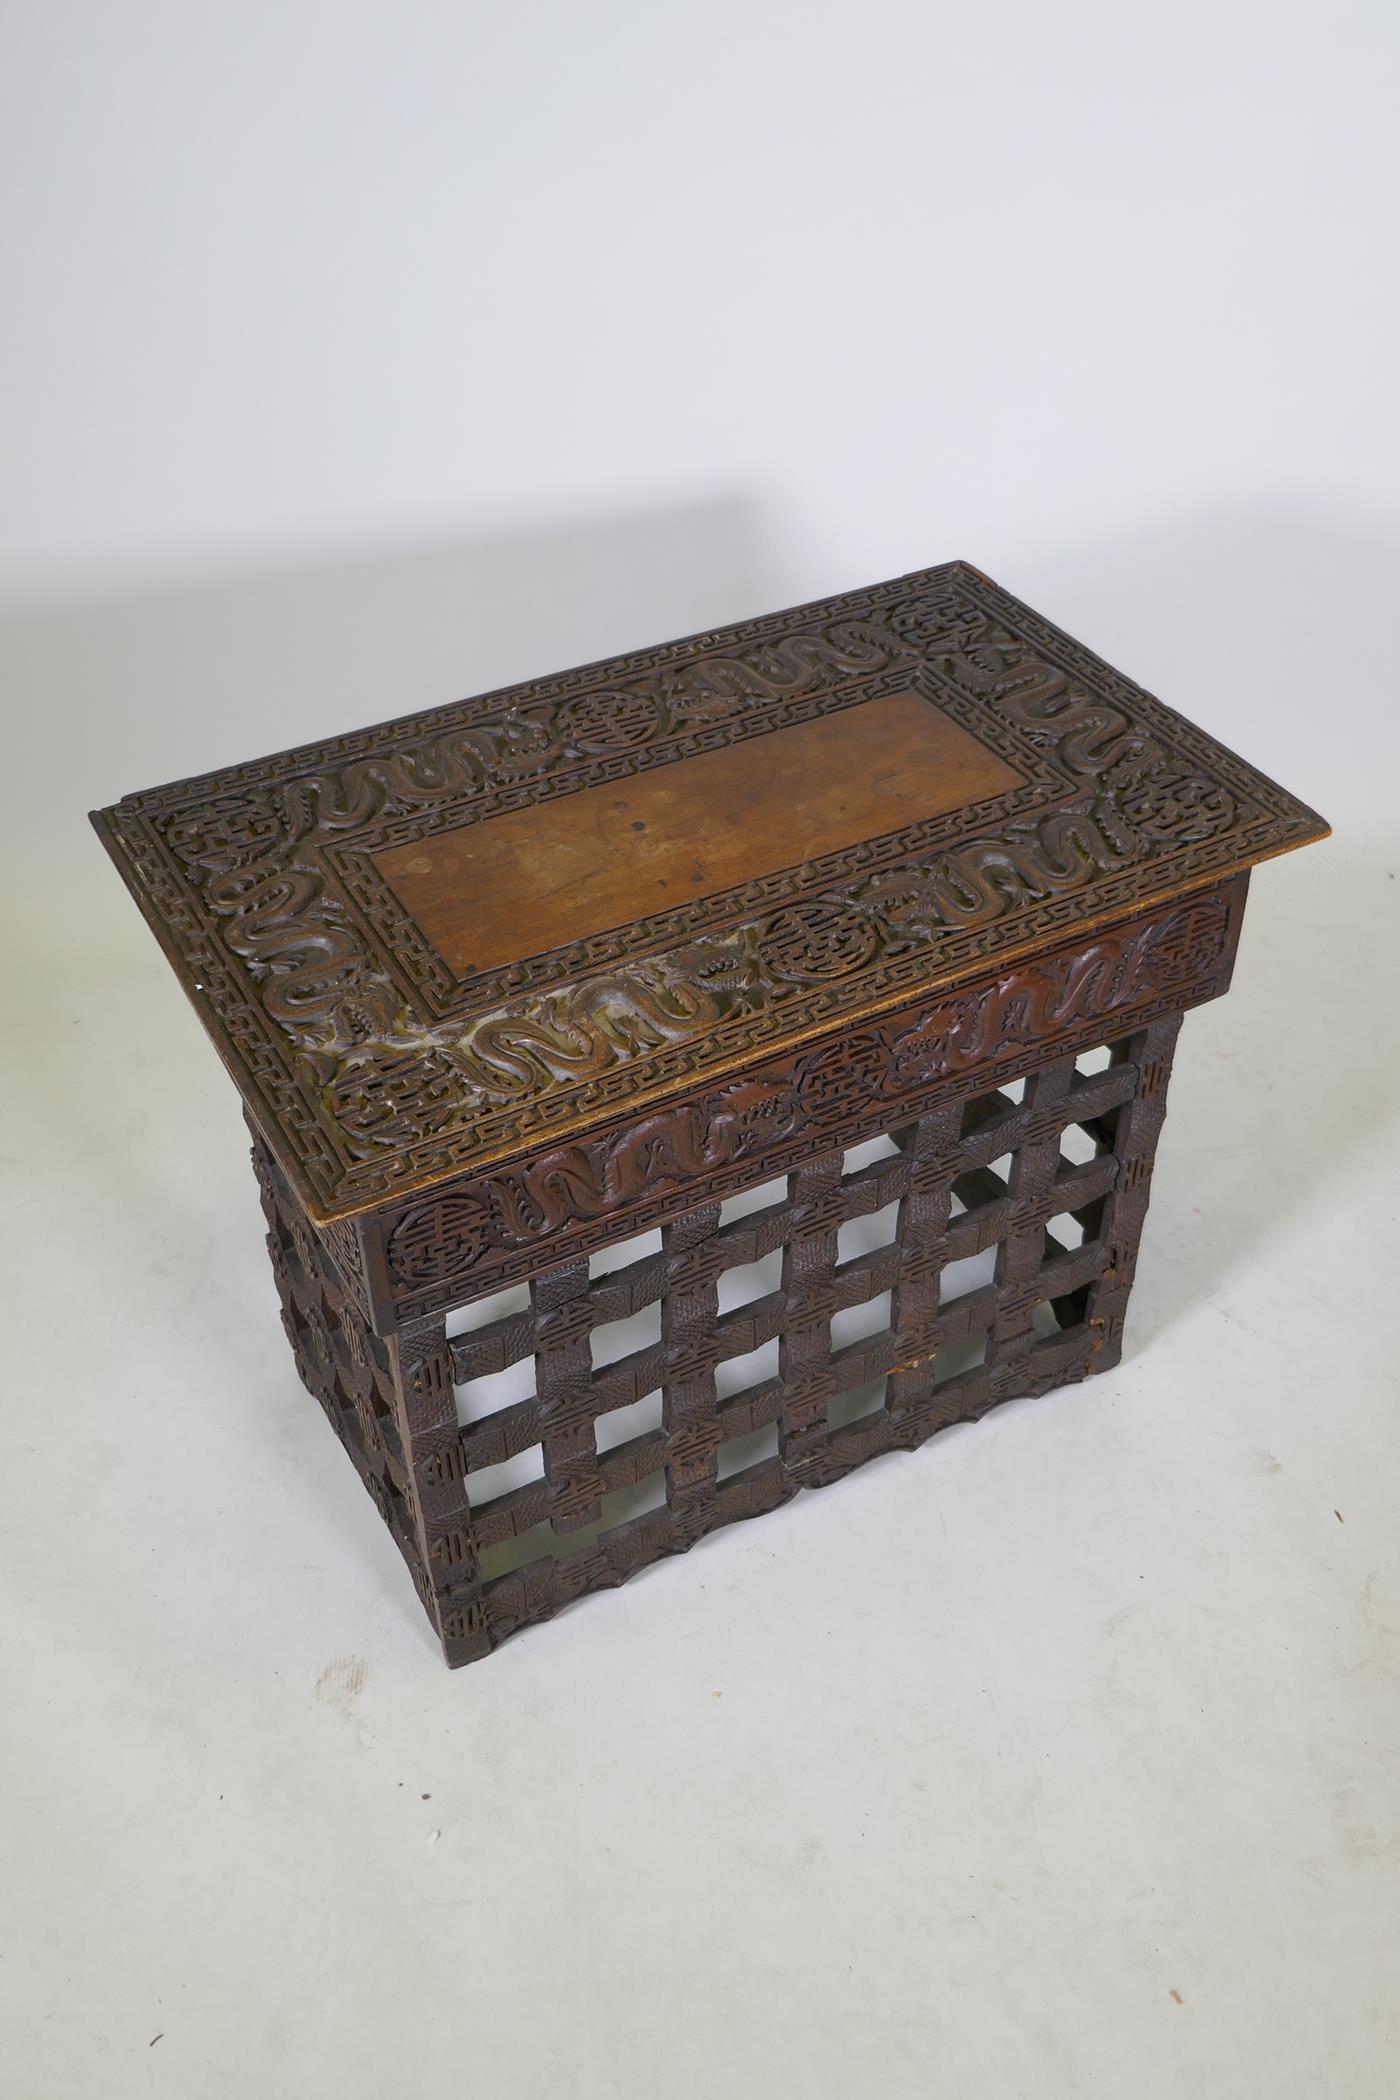 A C19th Chinese carved hardwood travel desk with a pierced folding base, decorated with dragons - Image 2 of 7